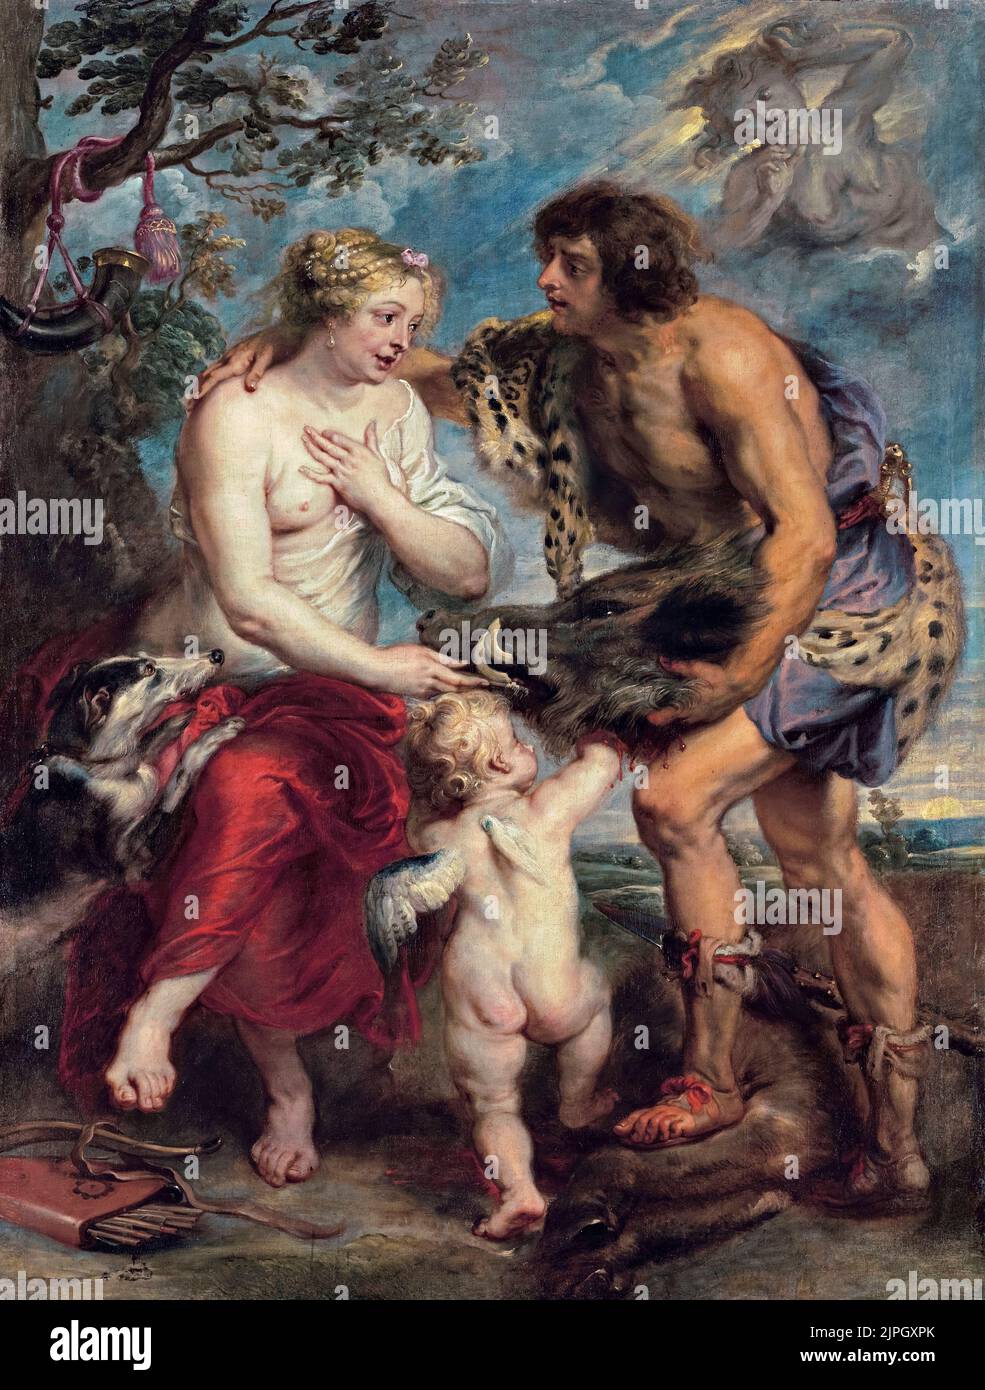 Peter Paul Rubens, Meleager and Atalanta, painting in oil on canvas, circa 1635 Stock Photo